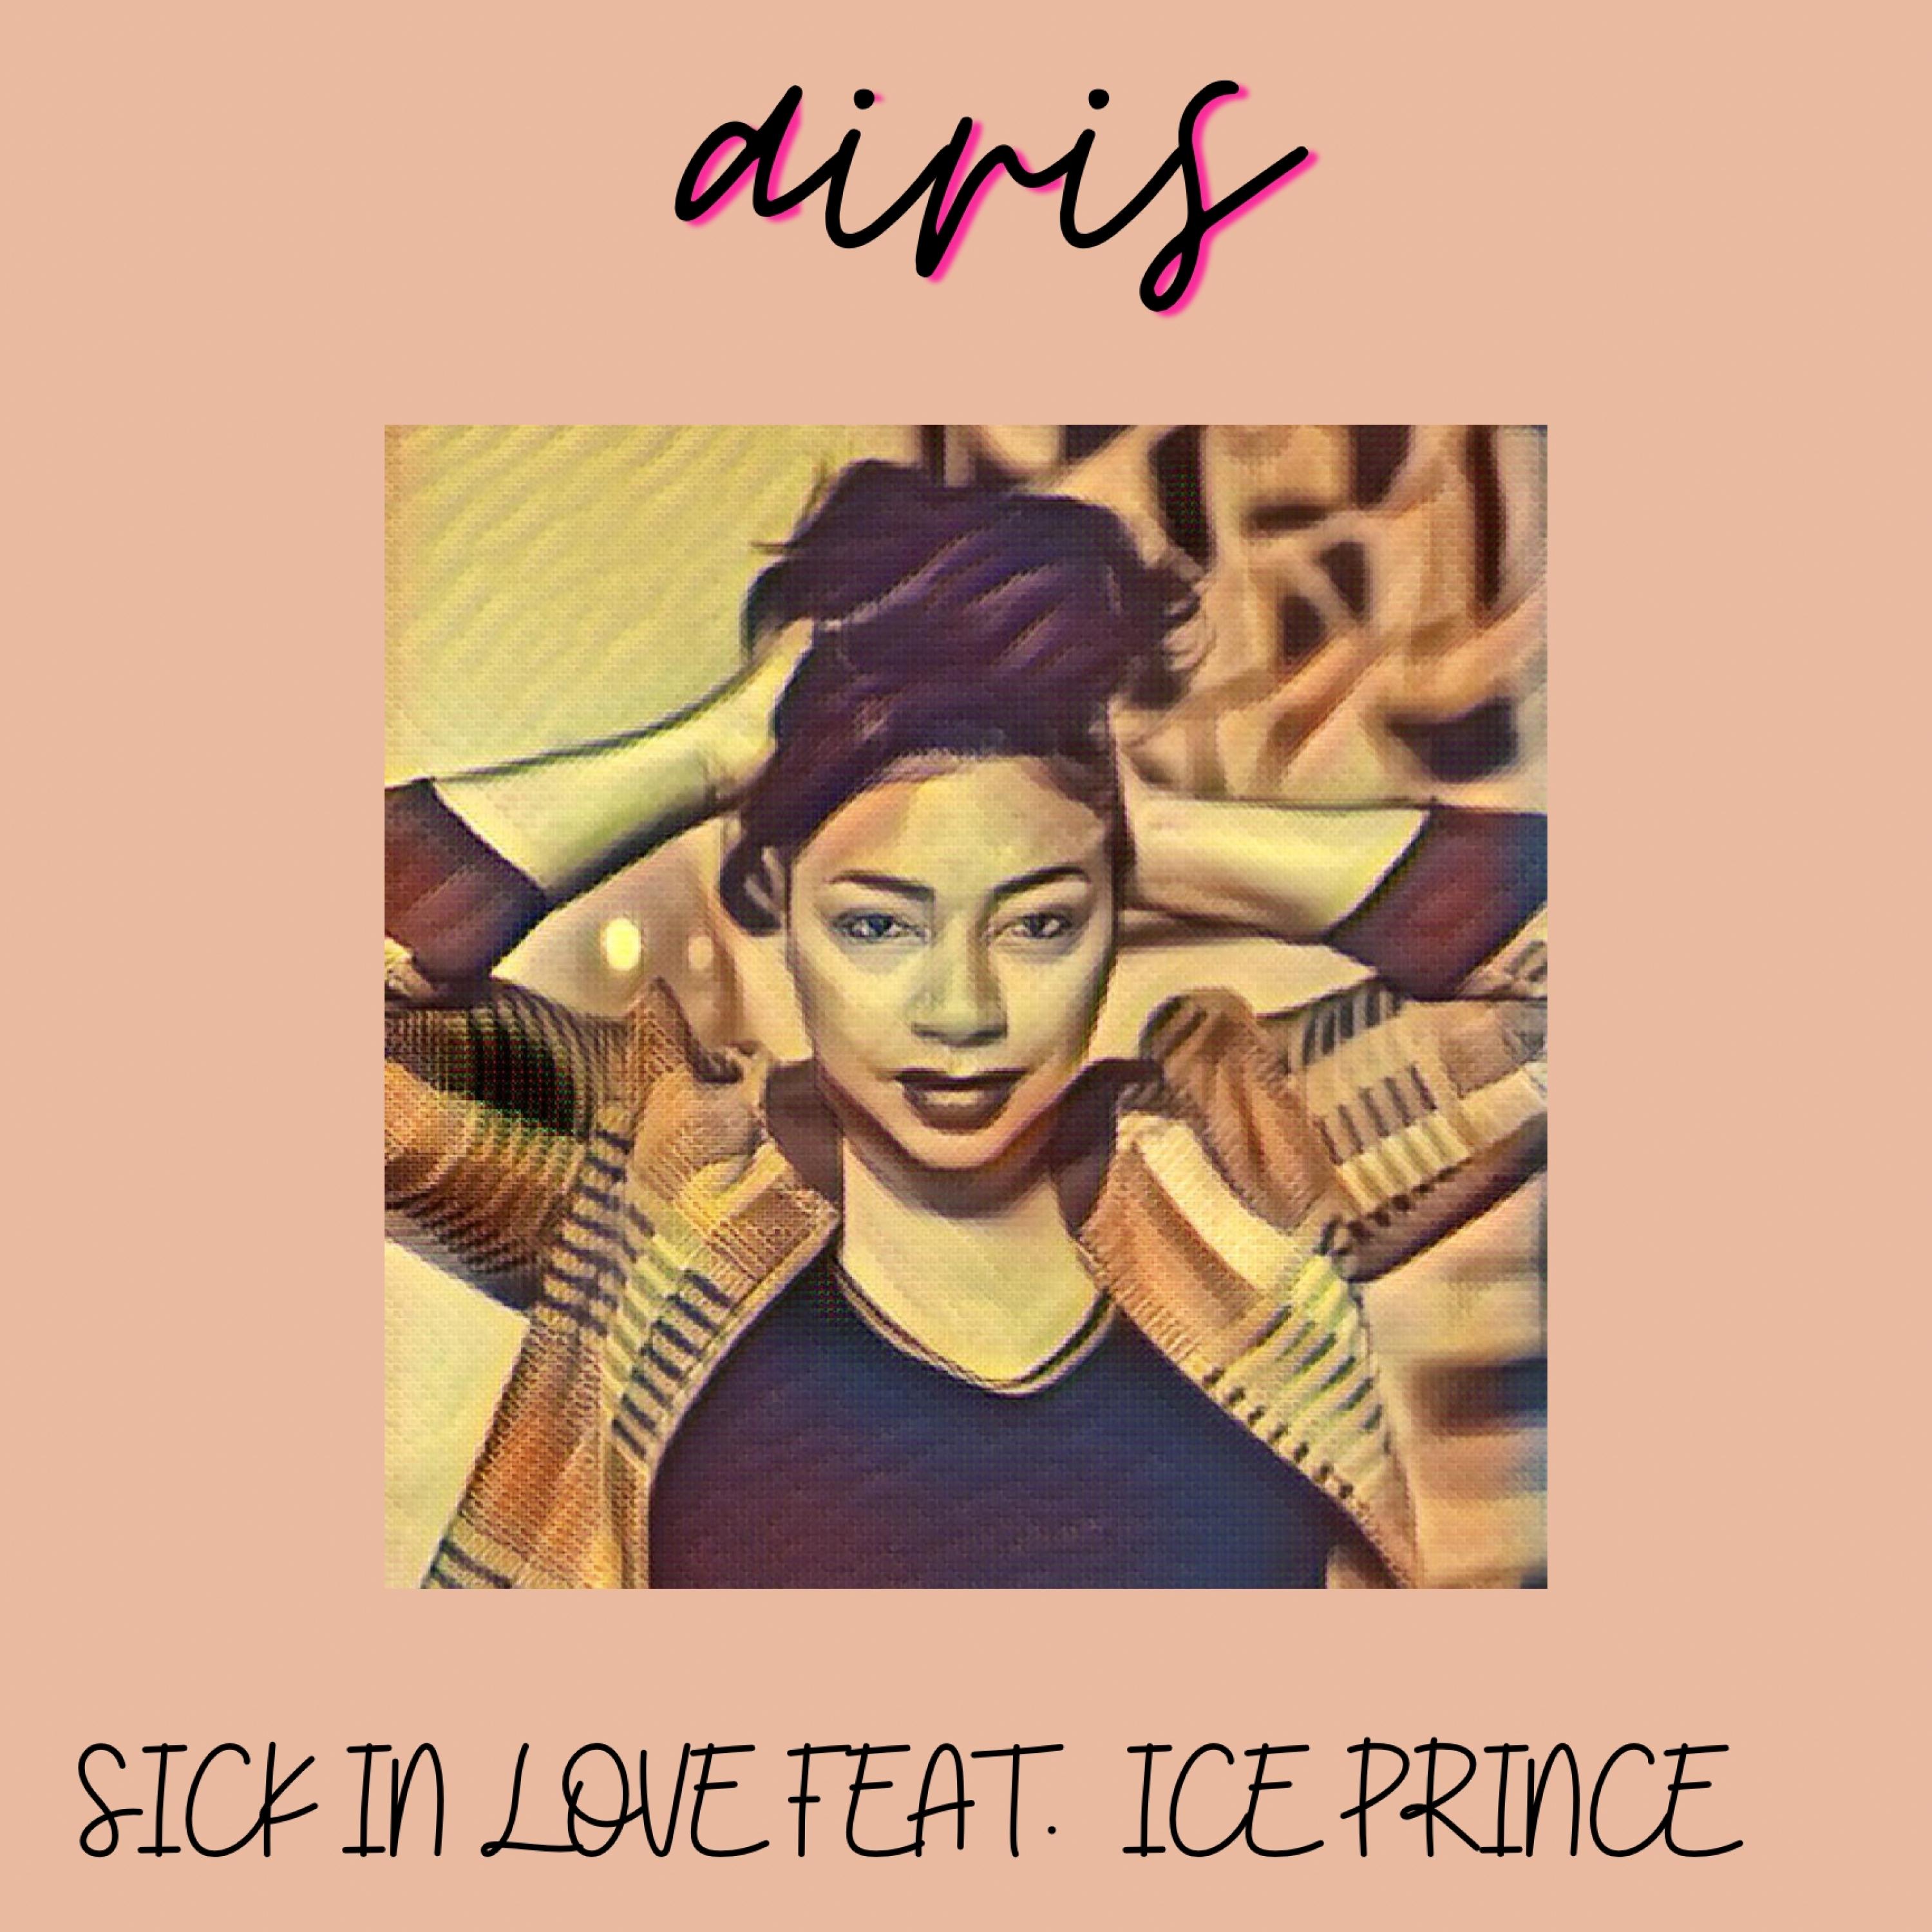 AIRIS - Sick in love (feat. Ice Prince)